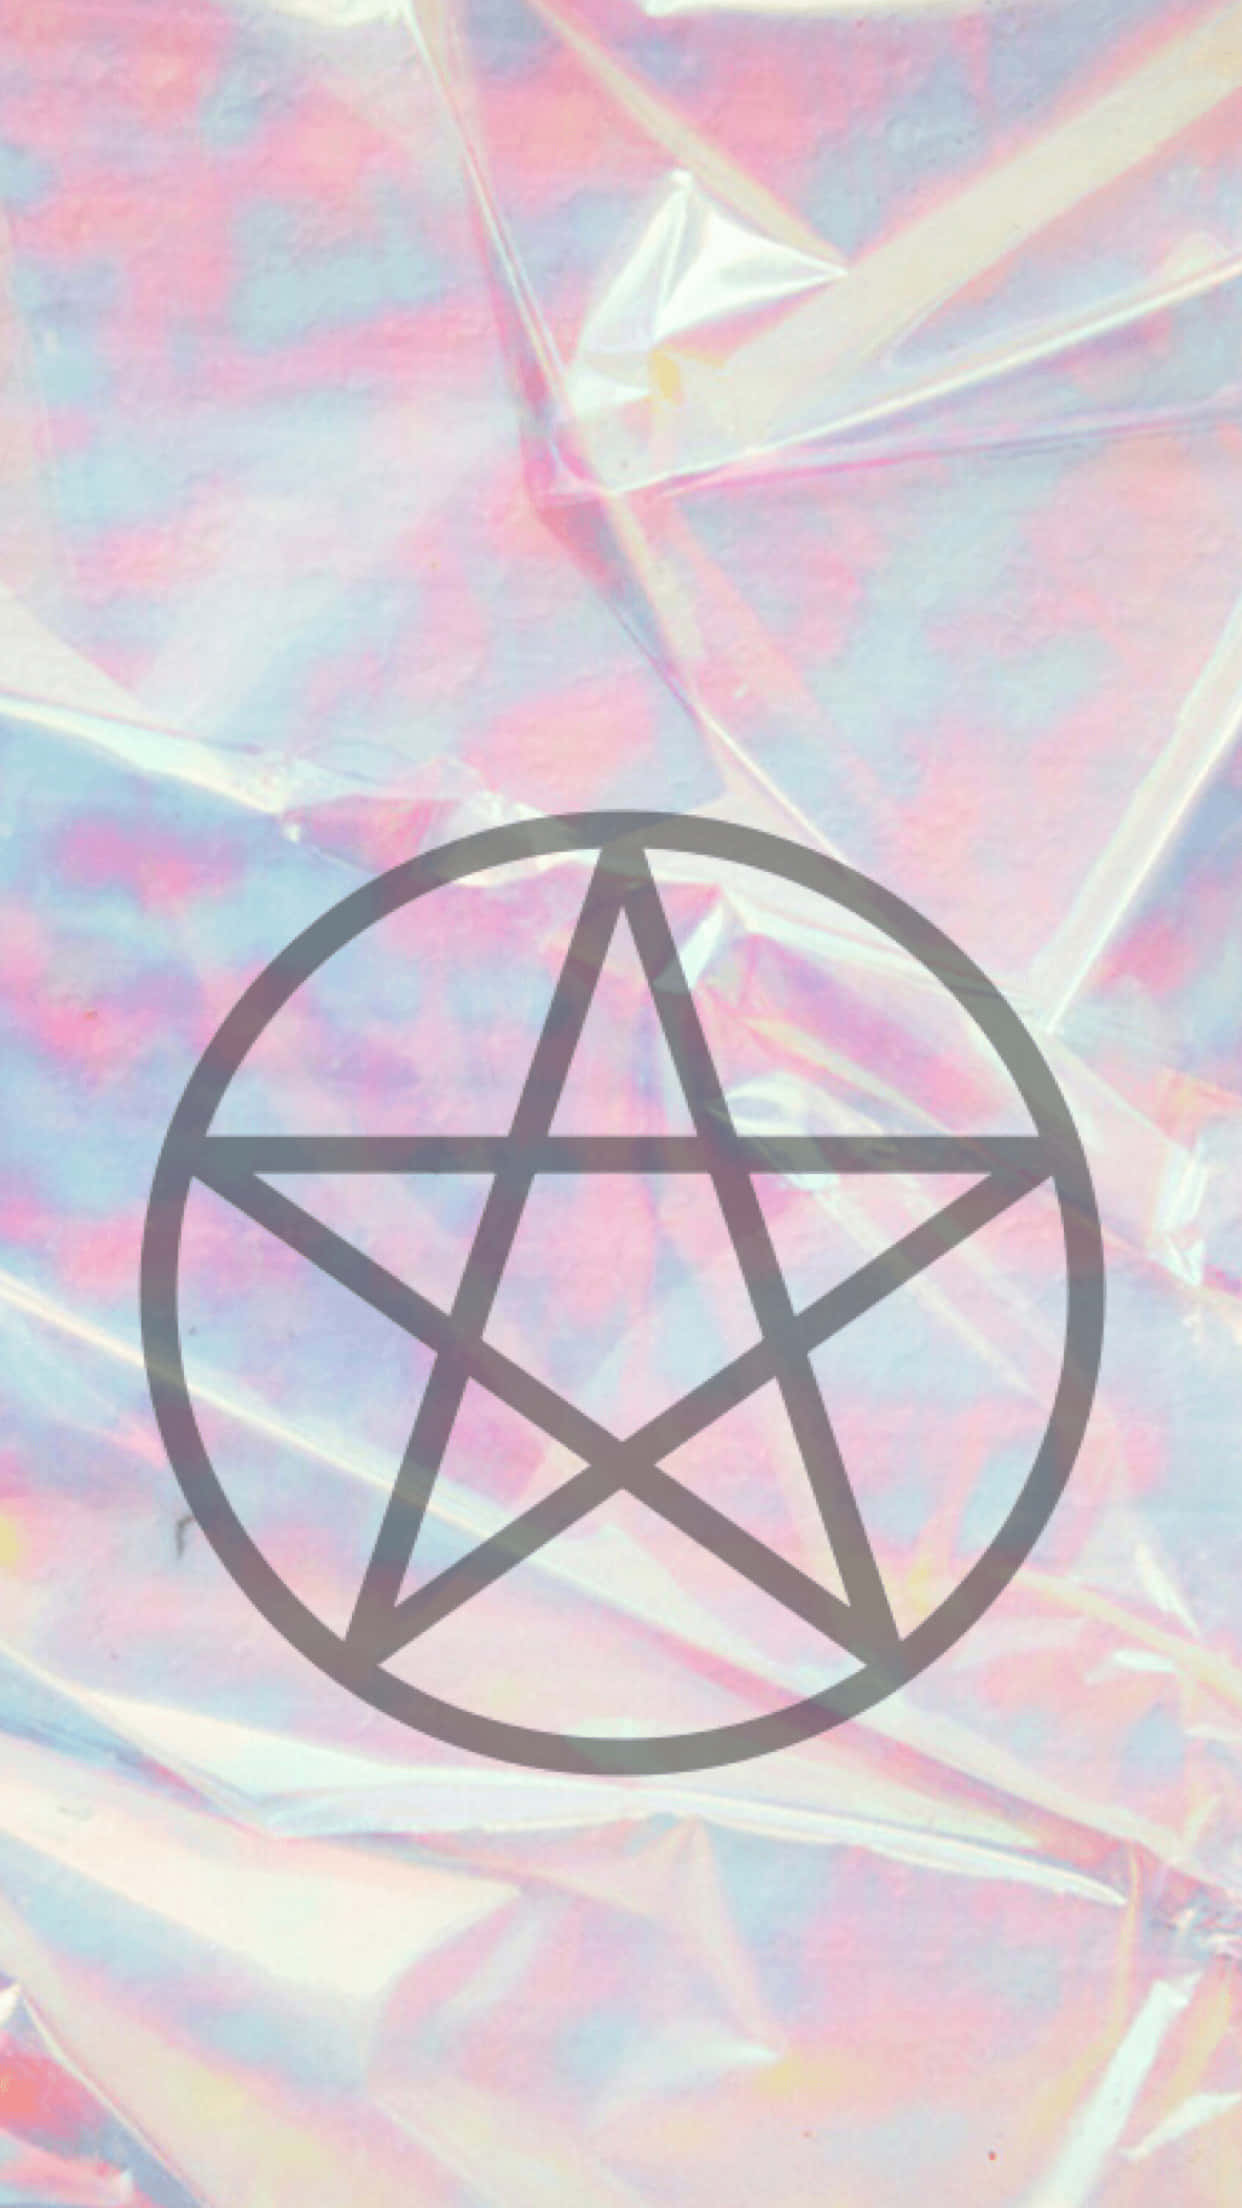 Dark astral graphic iPhone wallpaper  Witch wallpaper Witchy wallpaper  Phone wallpaper patterns